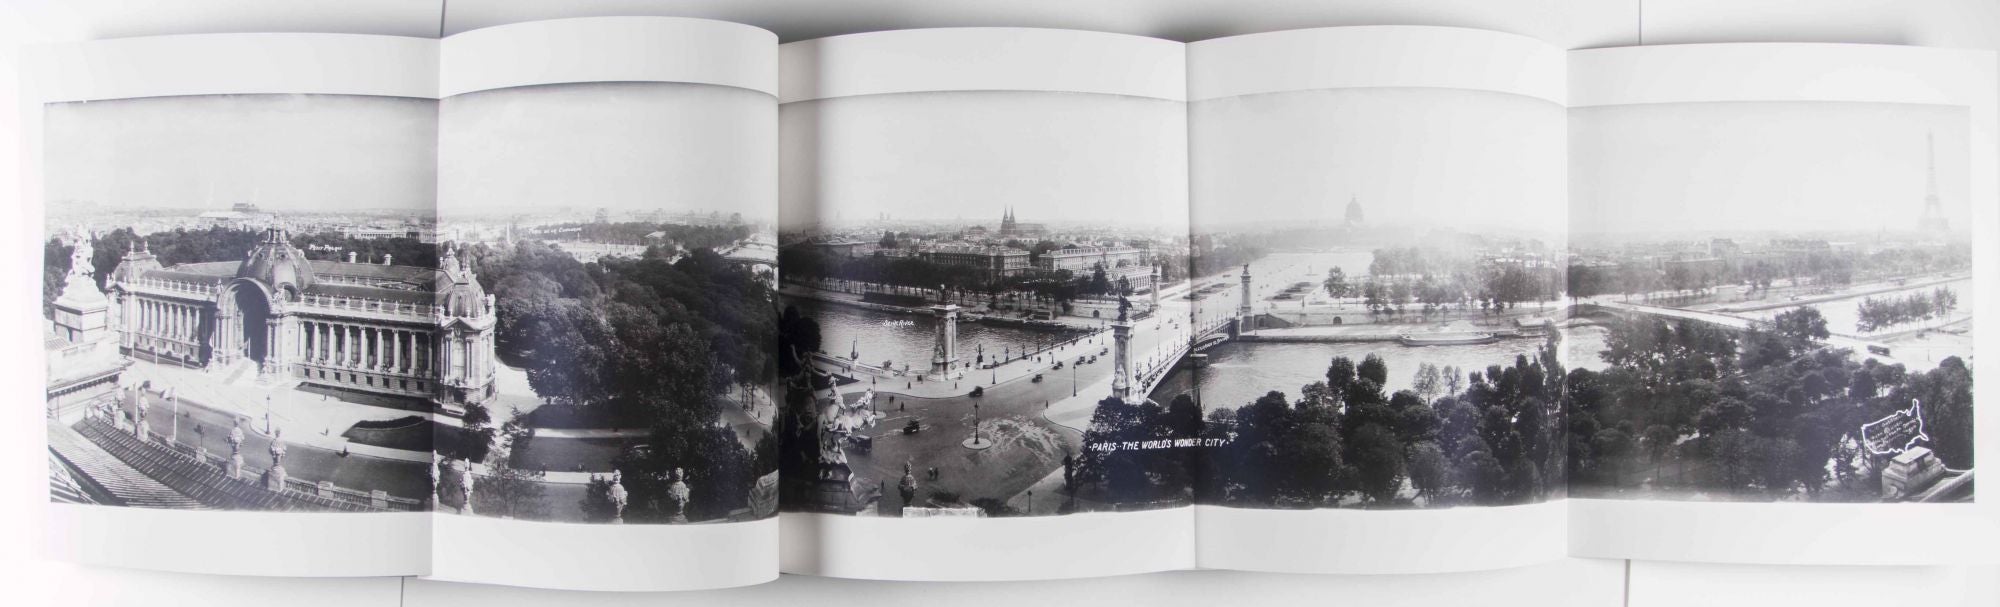 The Panoramic Photography of Eugene O. Goldbeck by Clyde W. Burleson, E.  Jessica Hickman, Eugene O. on Eric Chaim Kline, Bookseller